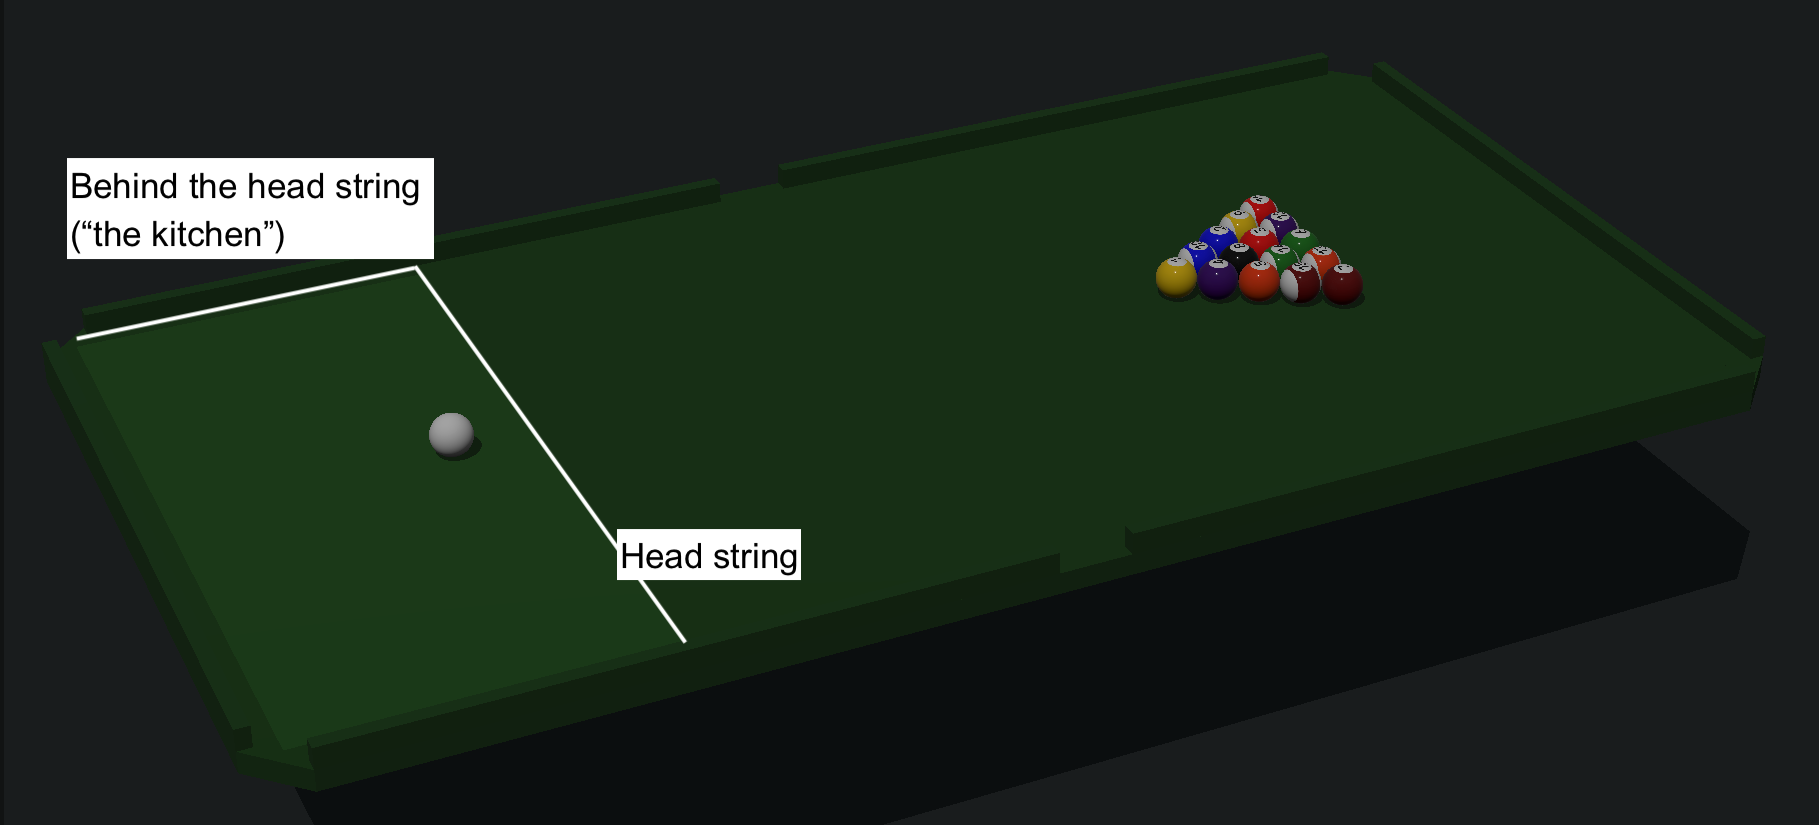 Image of a ball placed behind the head string